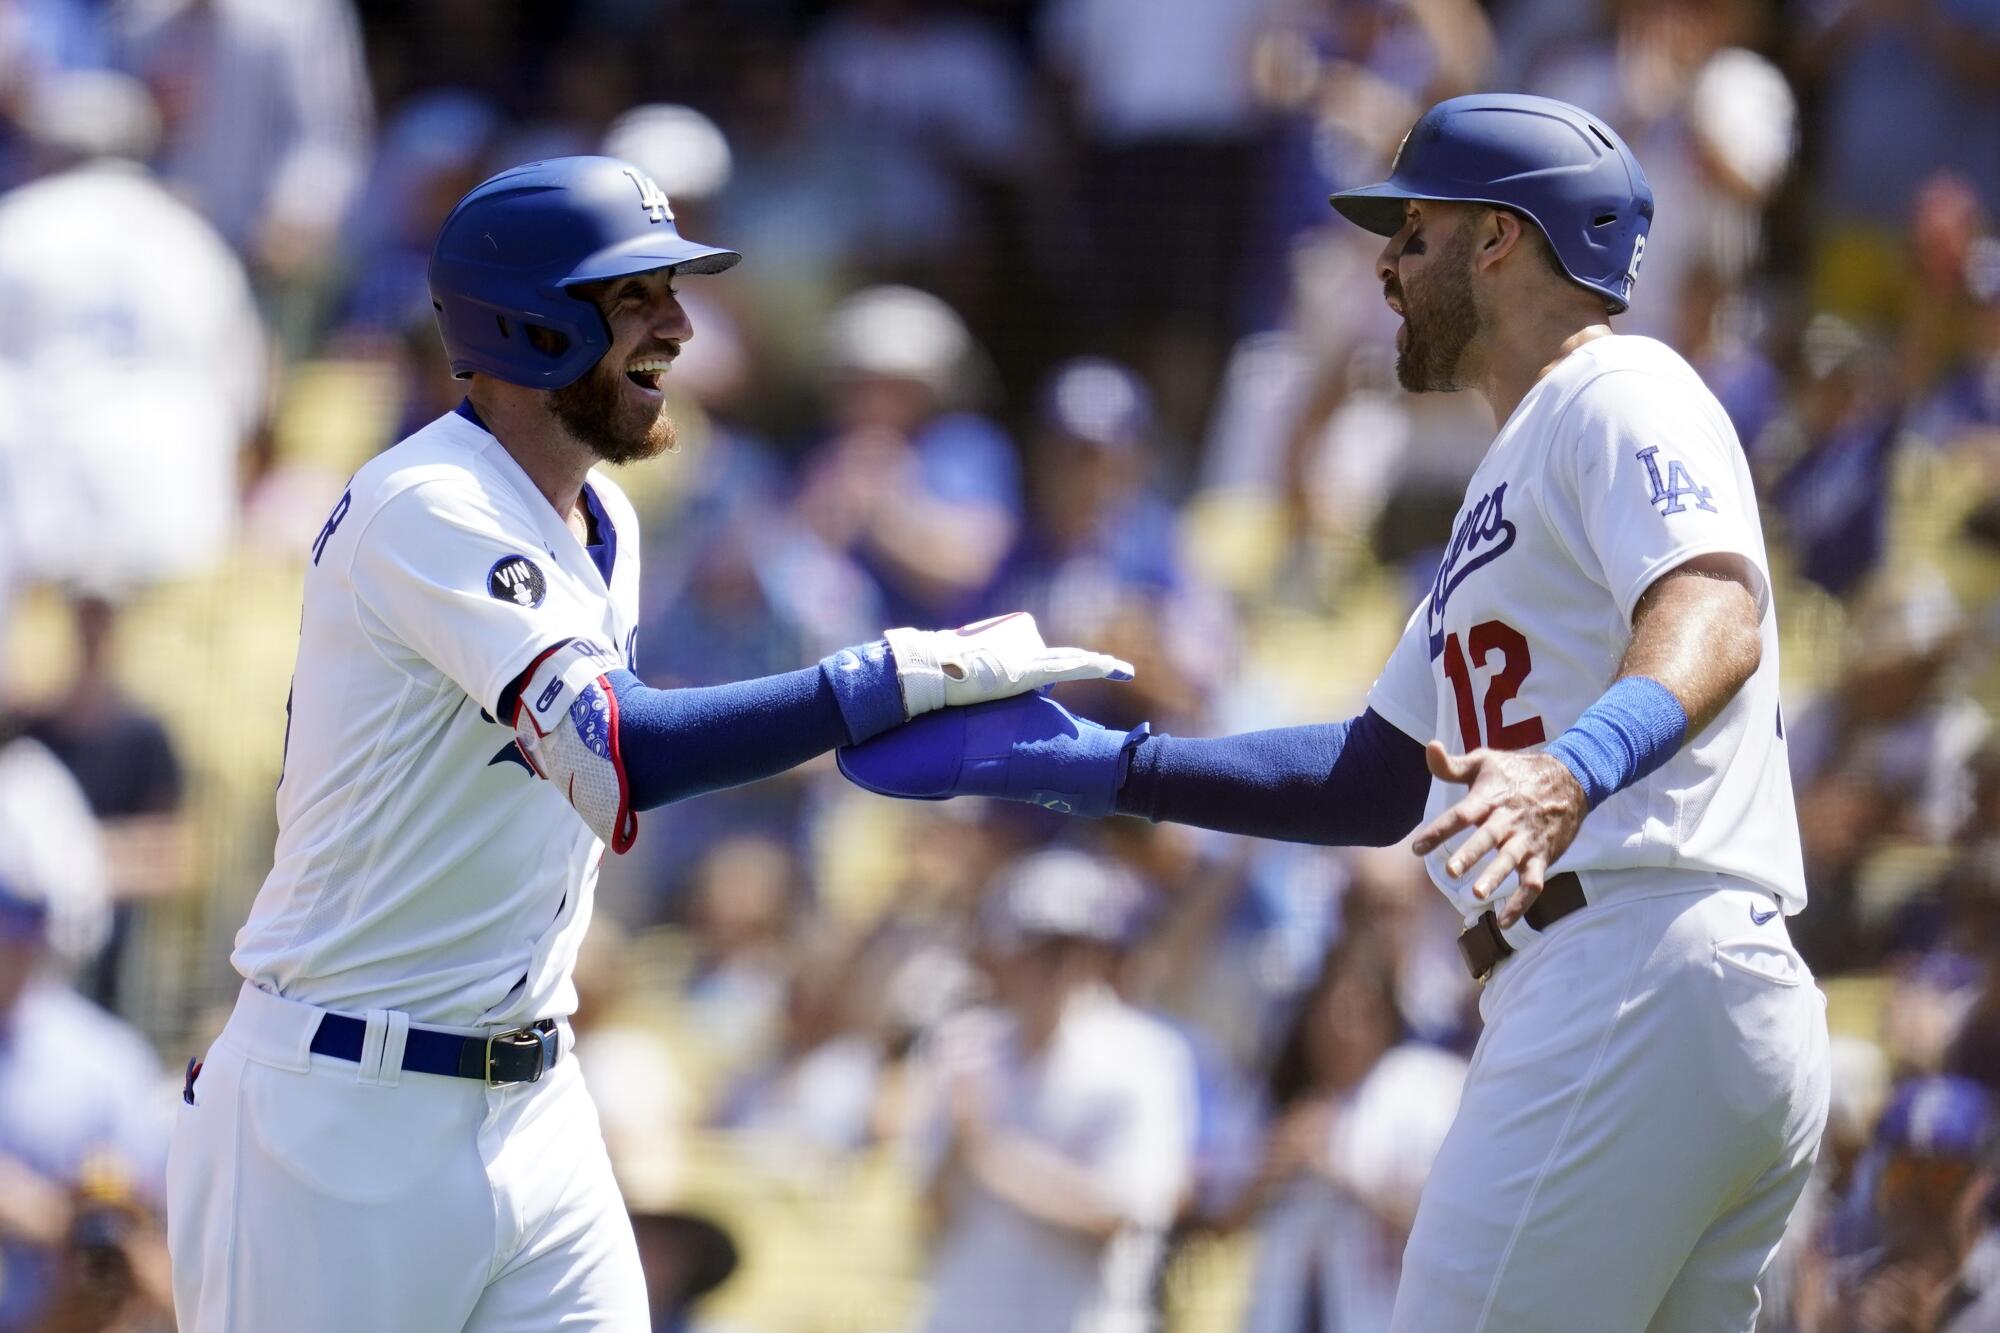 Cody Bellinger, left, celebrates with teammate Joey Gallo after hitting a two-run home run.